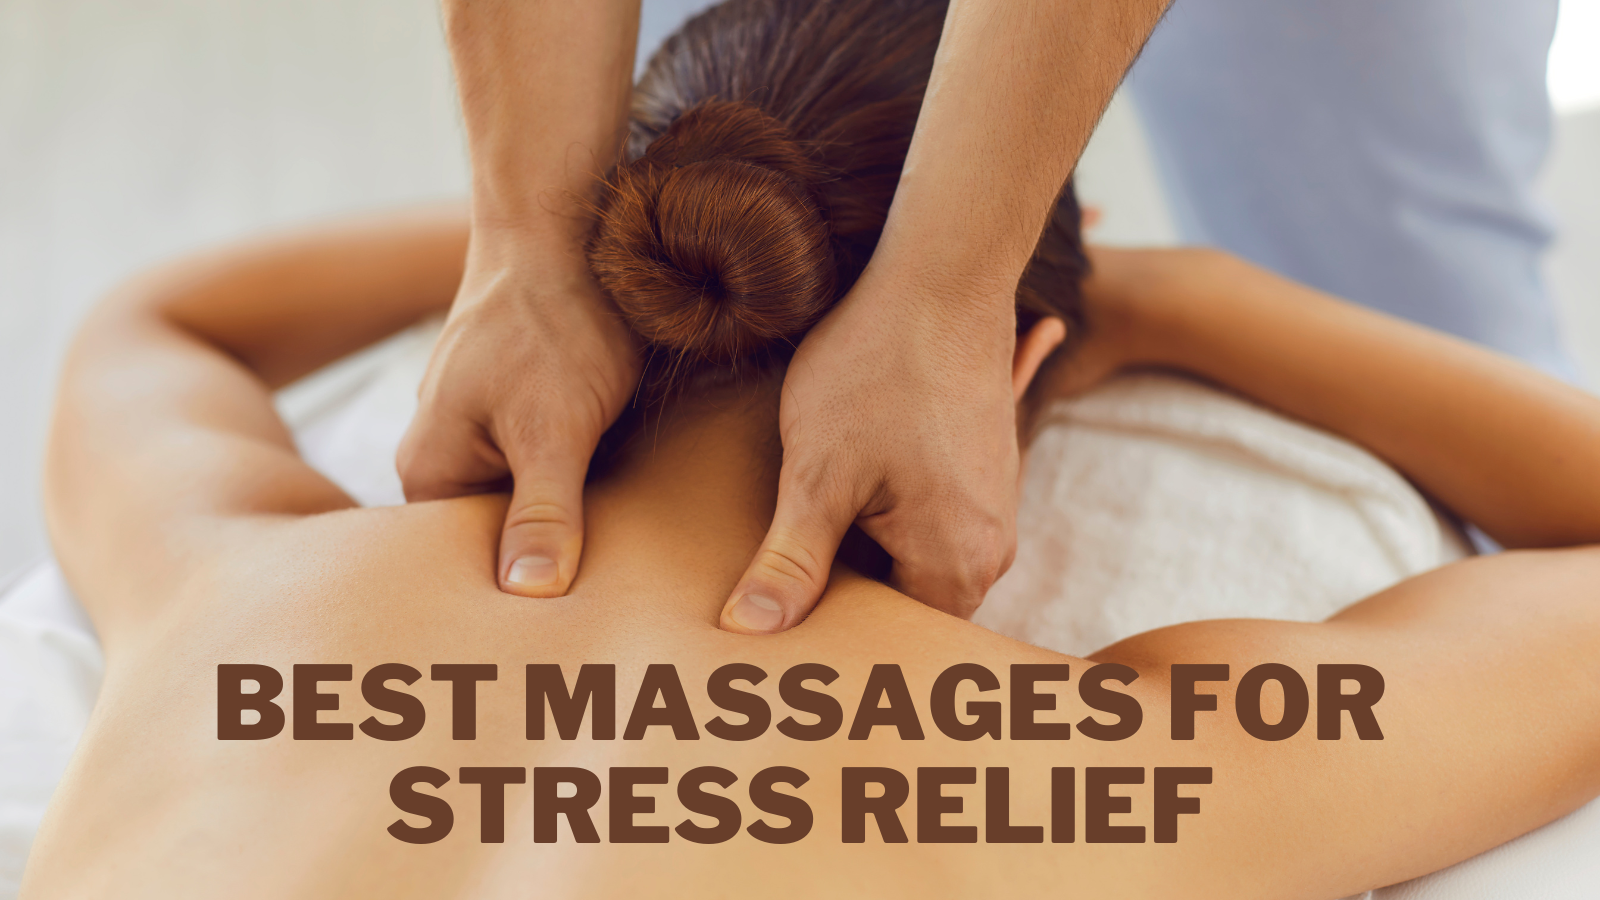 Best Massages For Stress Relief